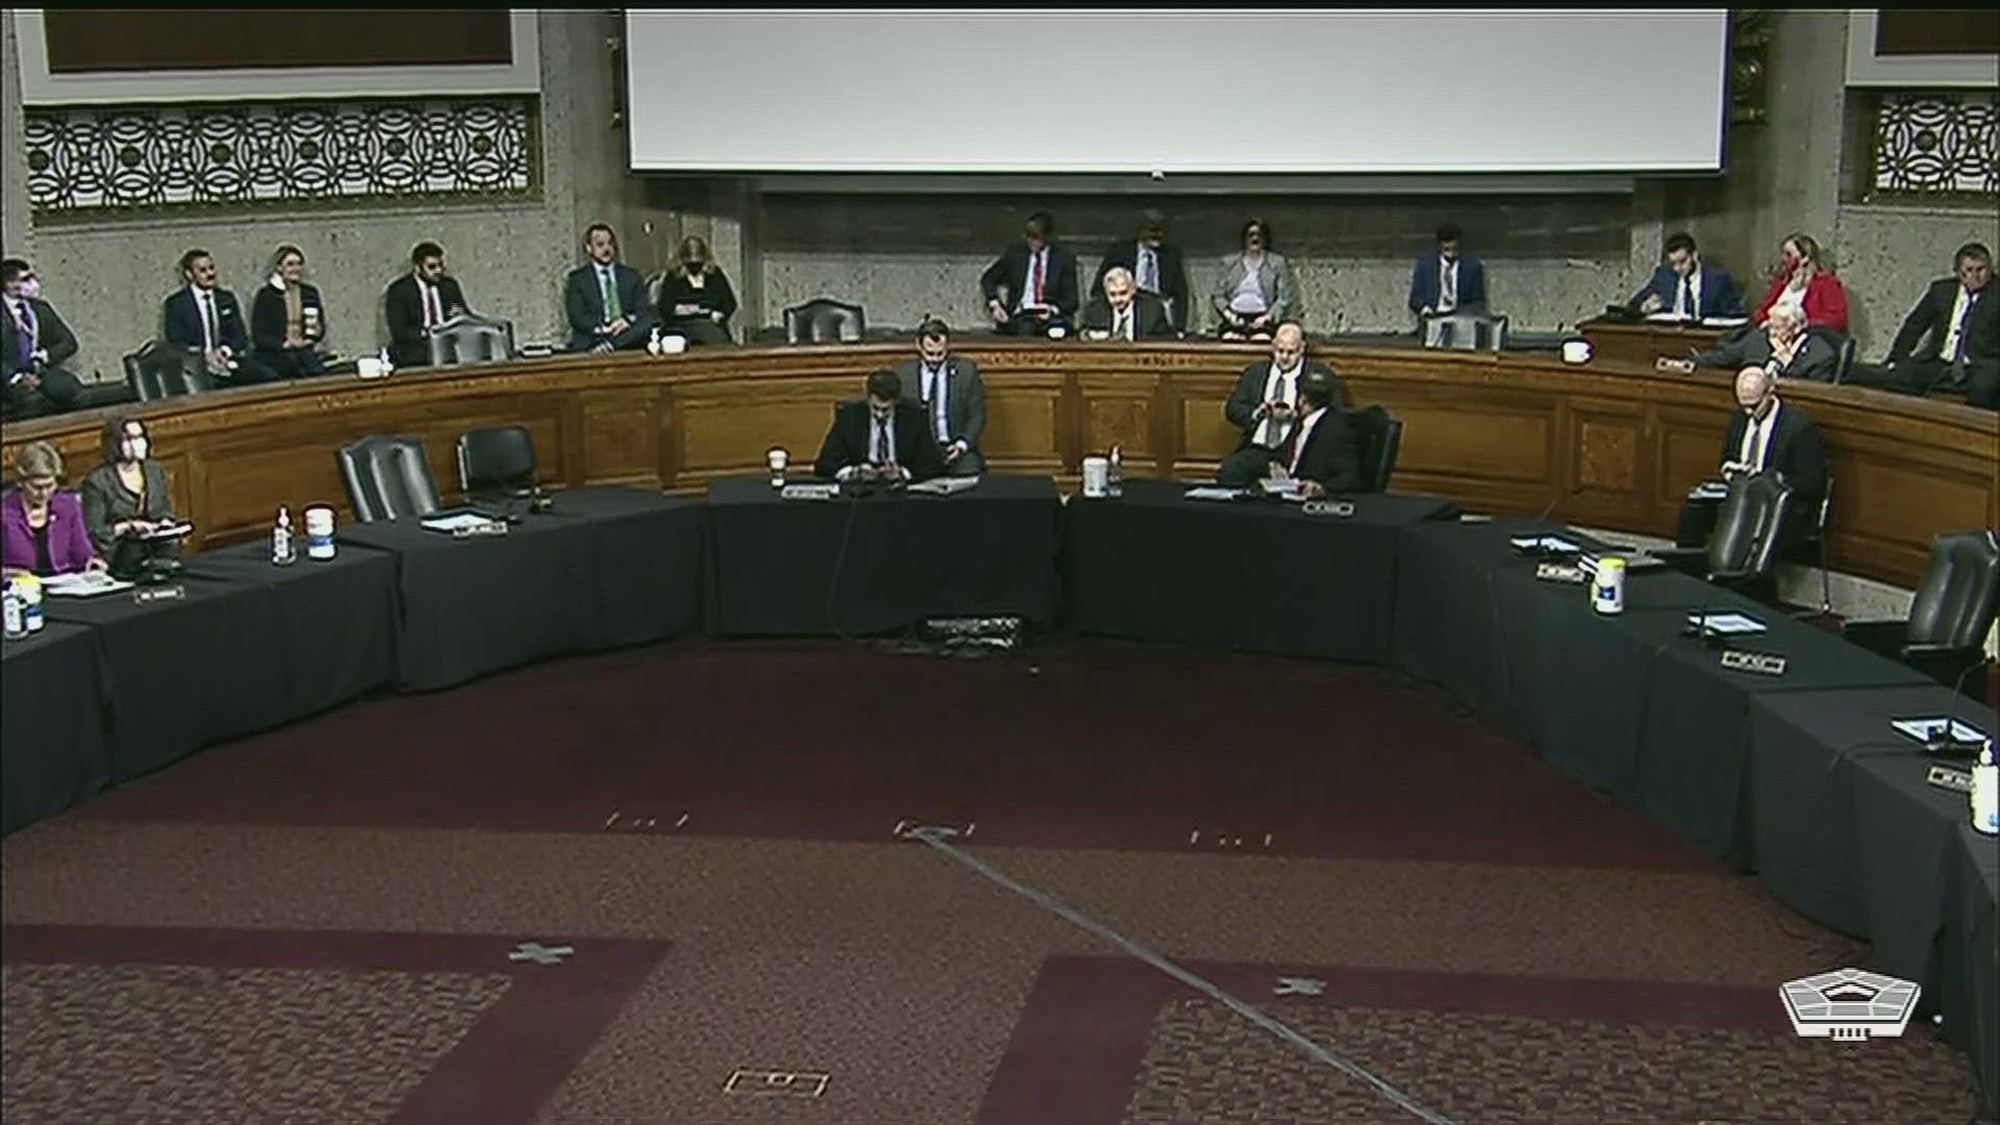 The Senate Armed Services Committee holds a hearing on the posture of the U. S. Indo-Pacific Command and U. S. Forces Korea. Witnesses include: Navy Adm. John Aquilino, commander of U.S. Indo-Pacific Command, and Army Gen. Paul LaCamera, commander of the United Nations Command/Combined Forces Command and U.S. Forces Korea.